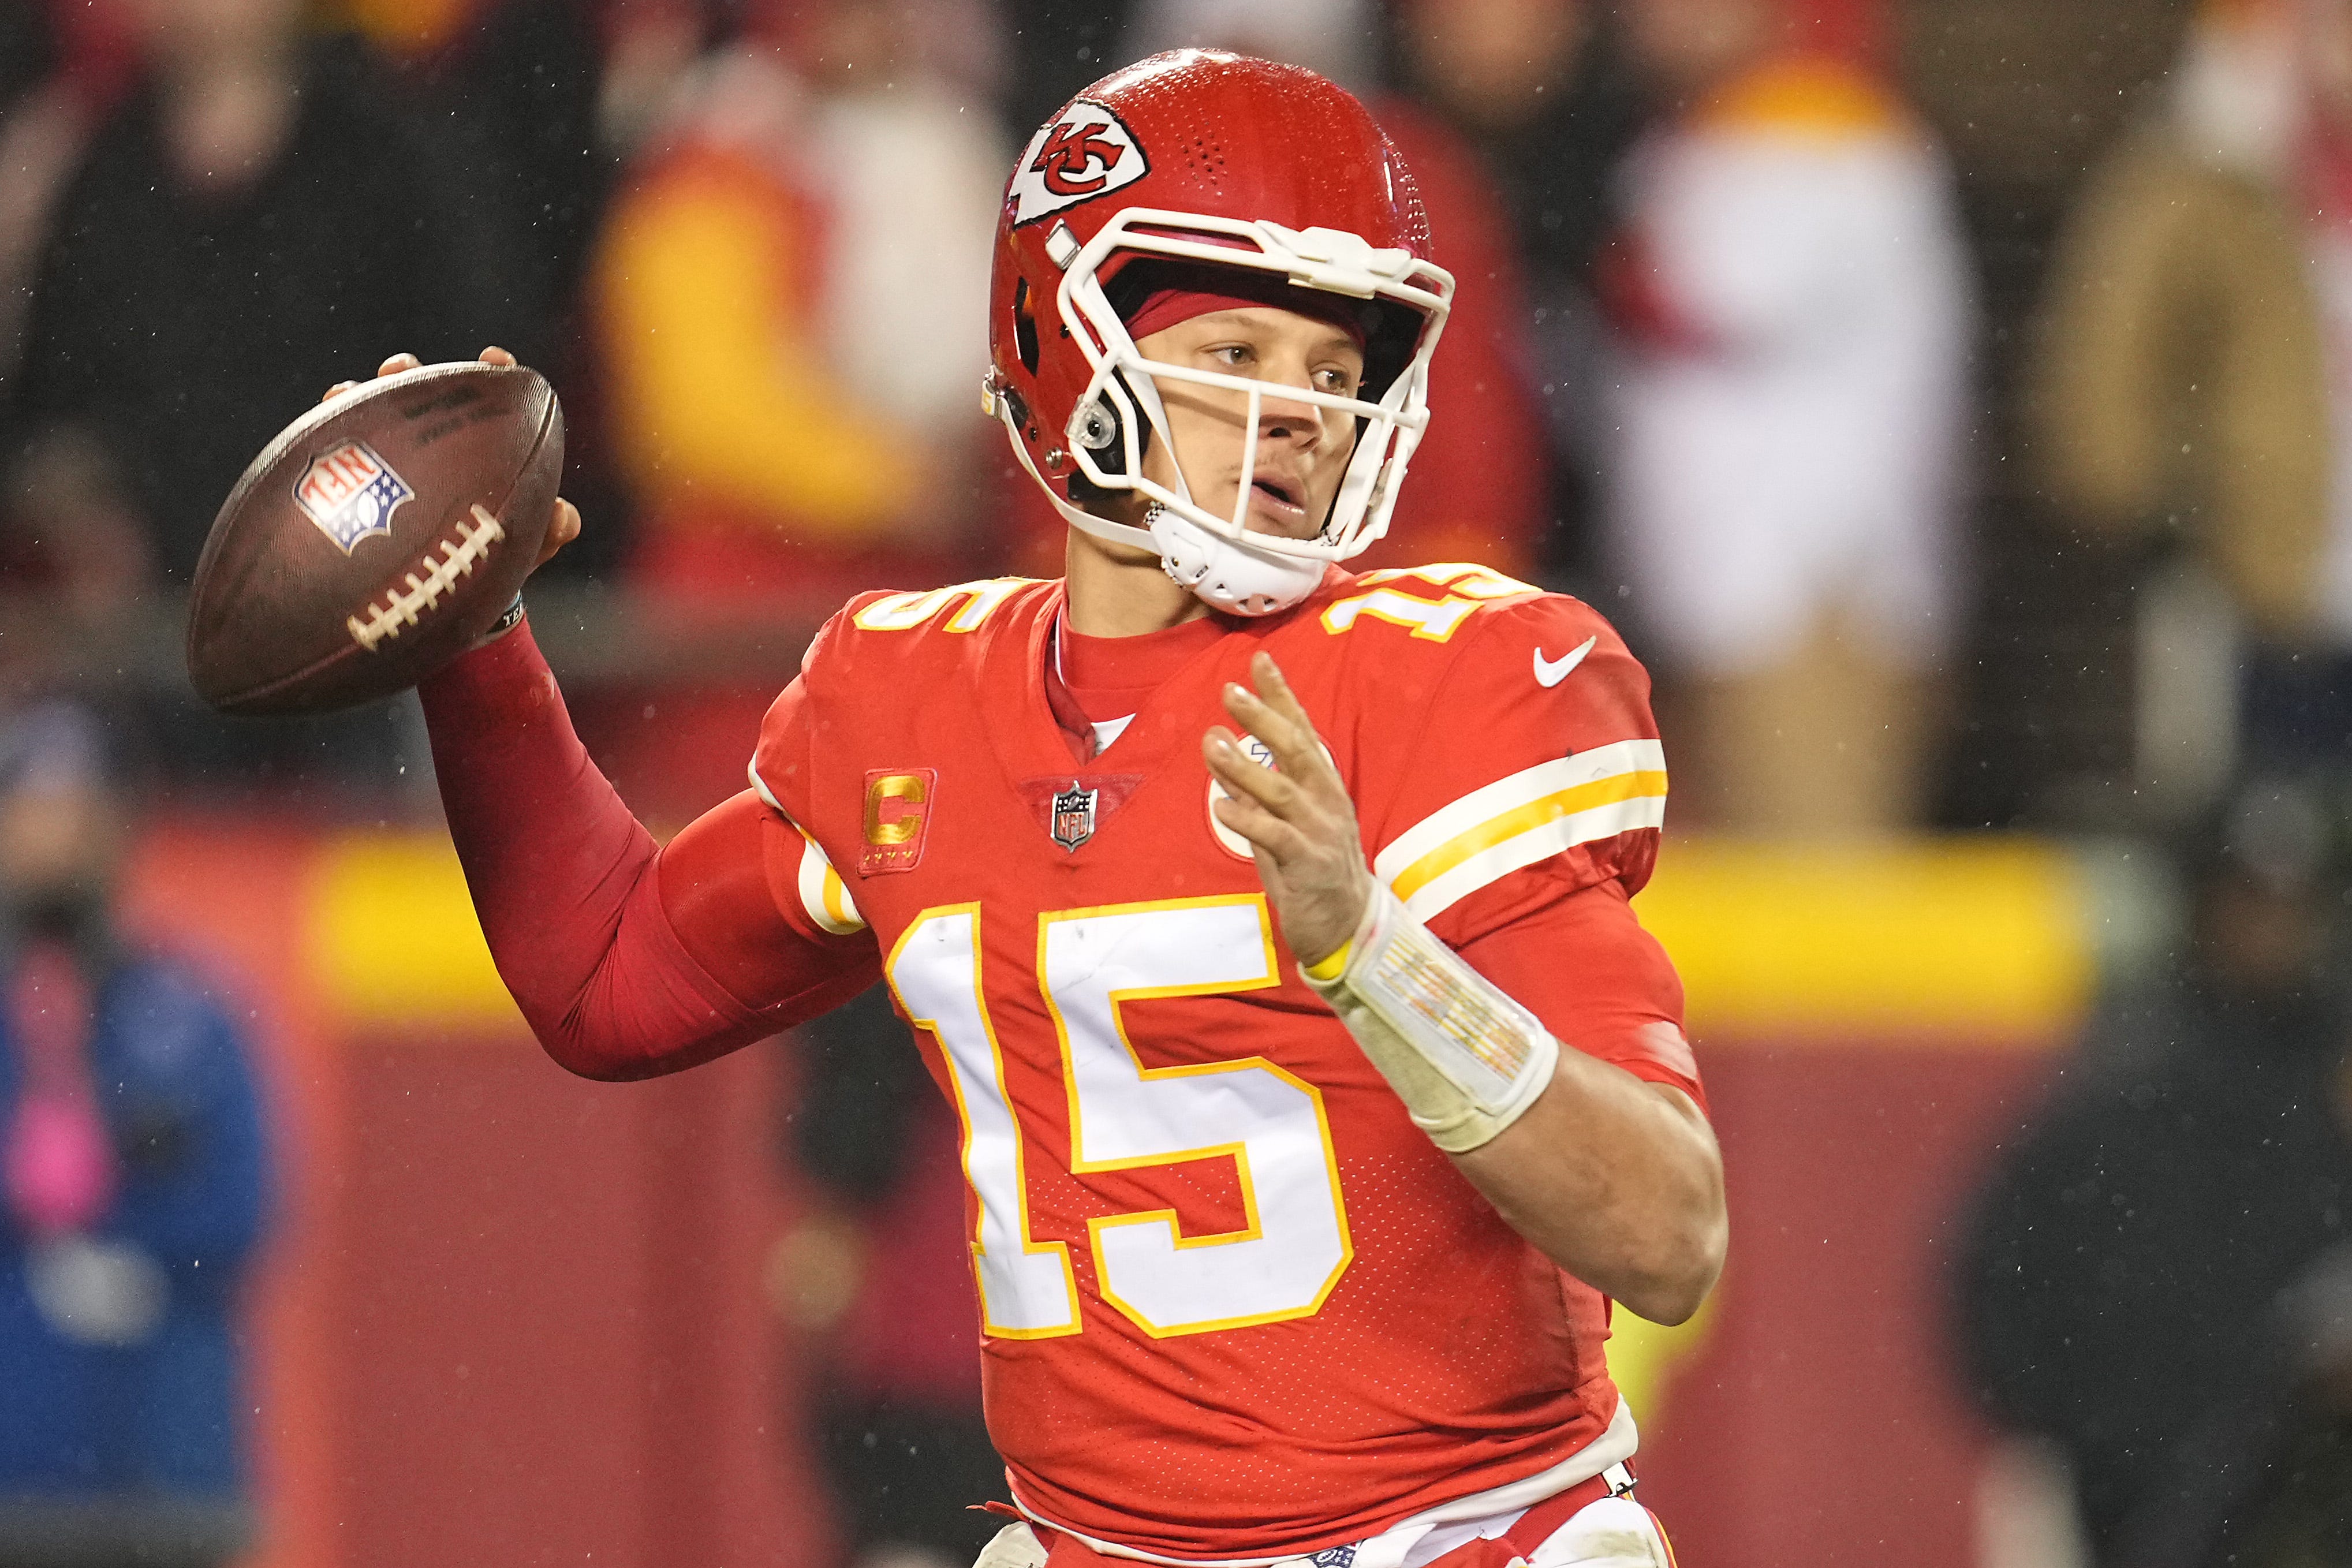 Patrick Mahomes overcomes ankle injury, Chiefs beat Jaguars to reach fifth AFC title game in a row